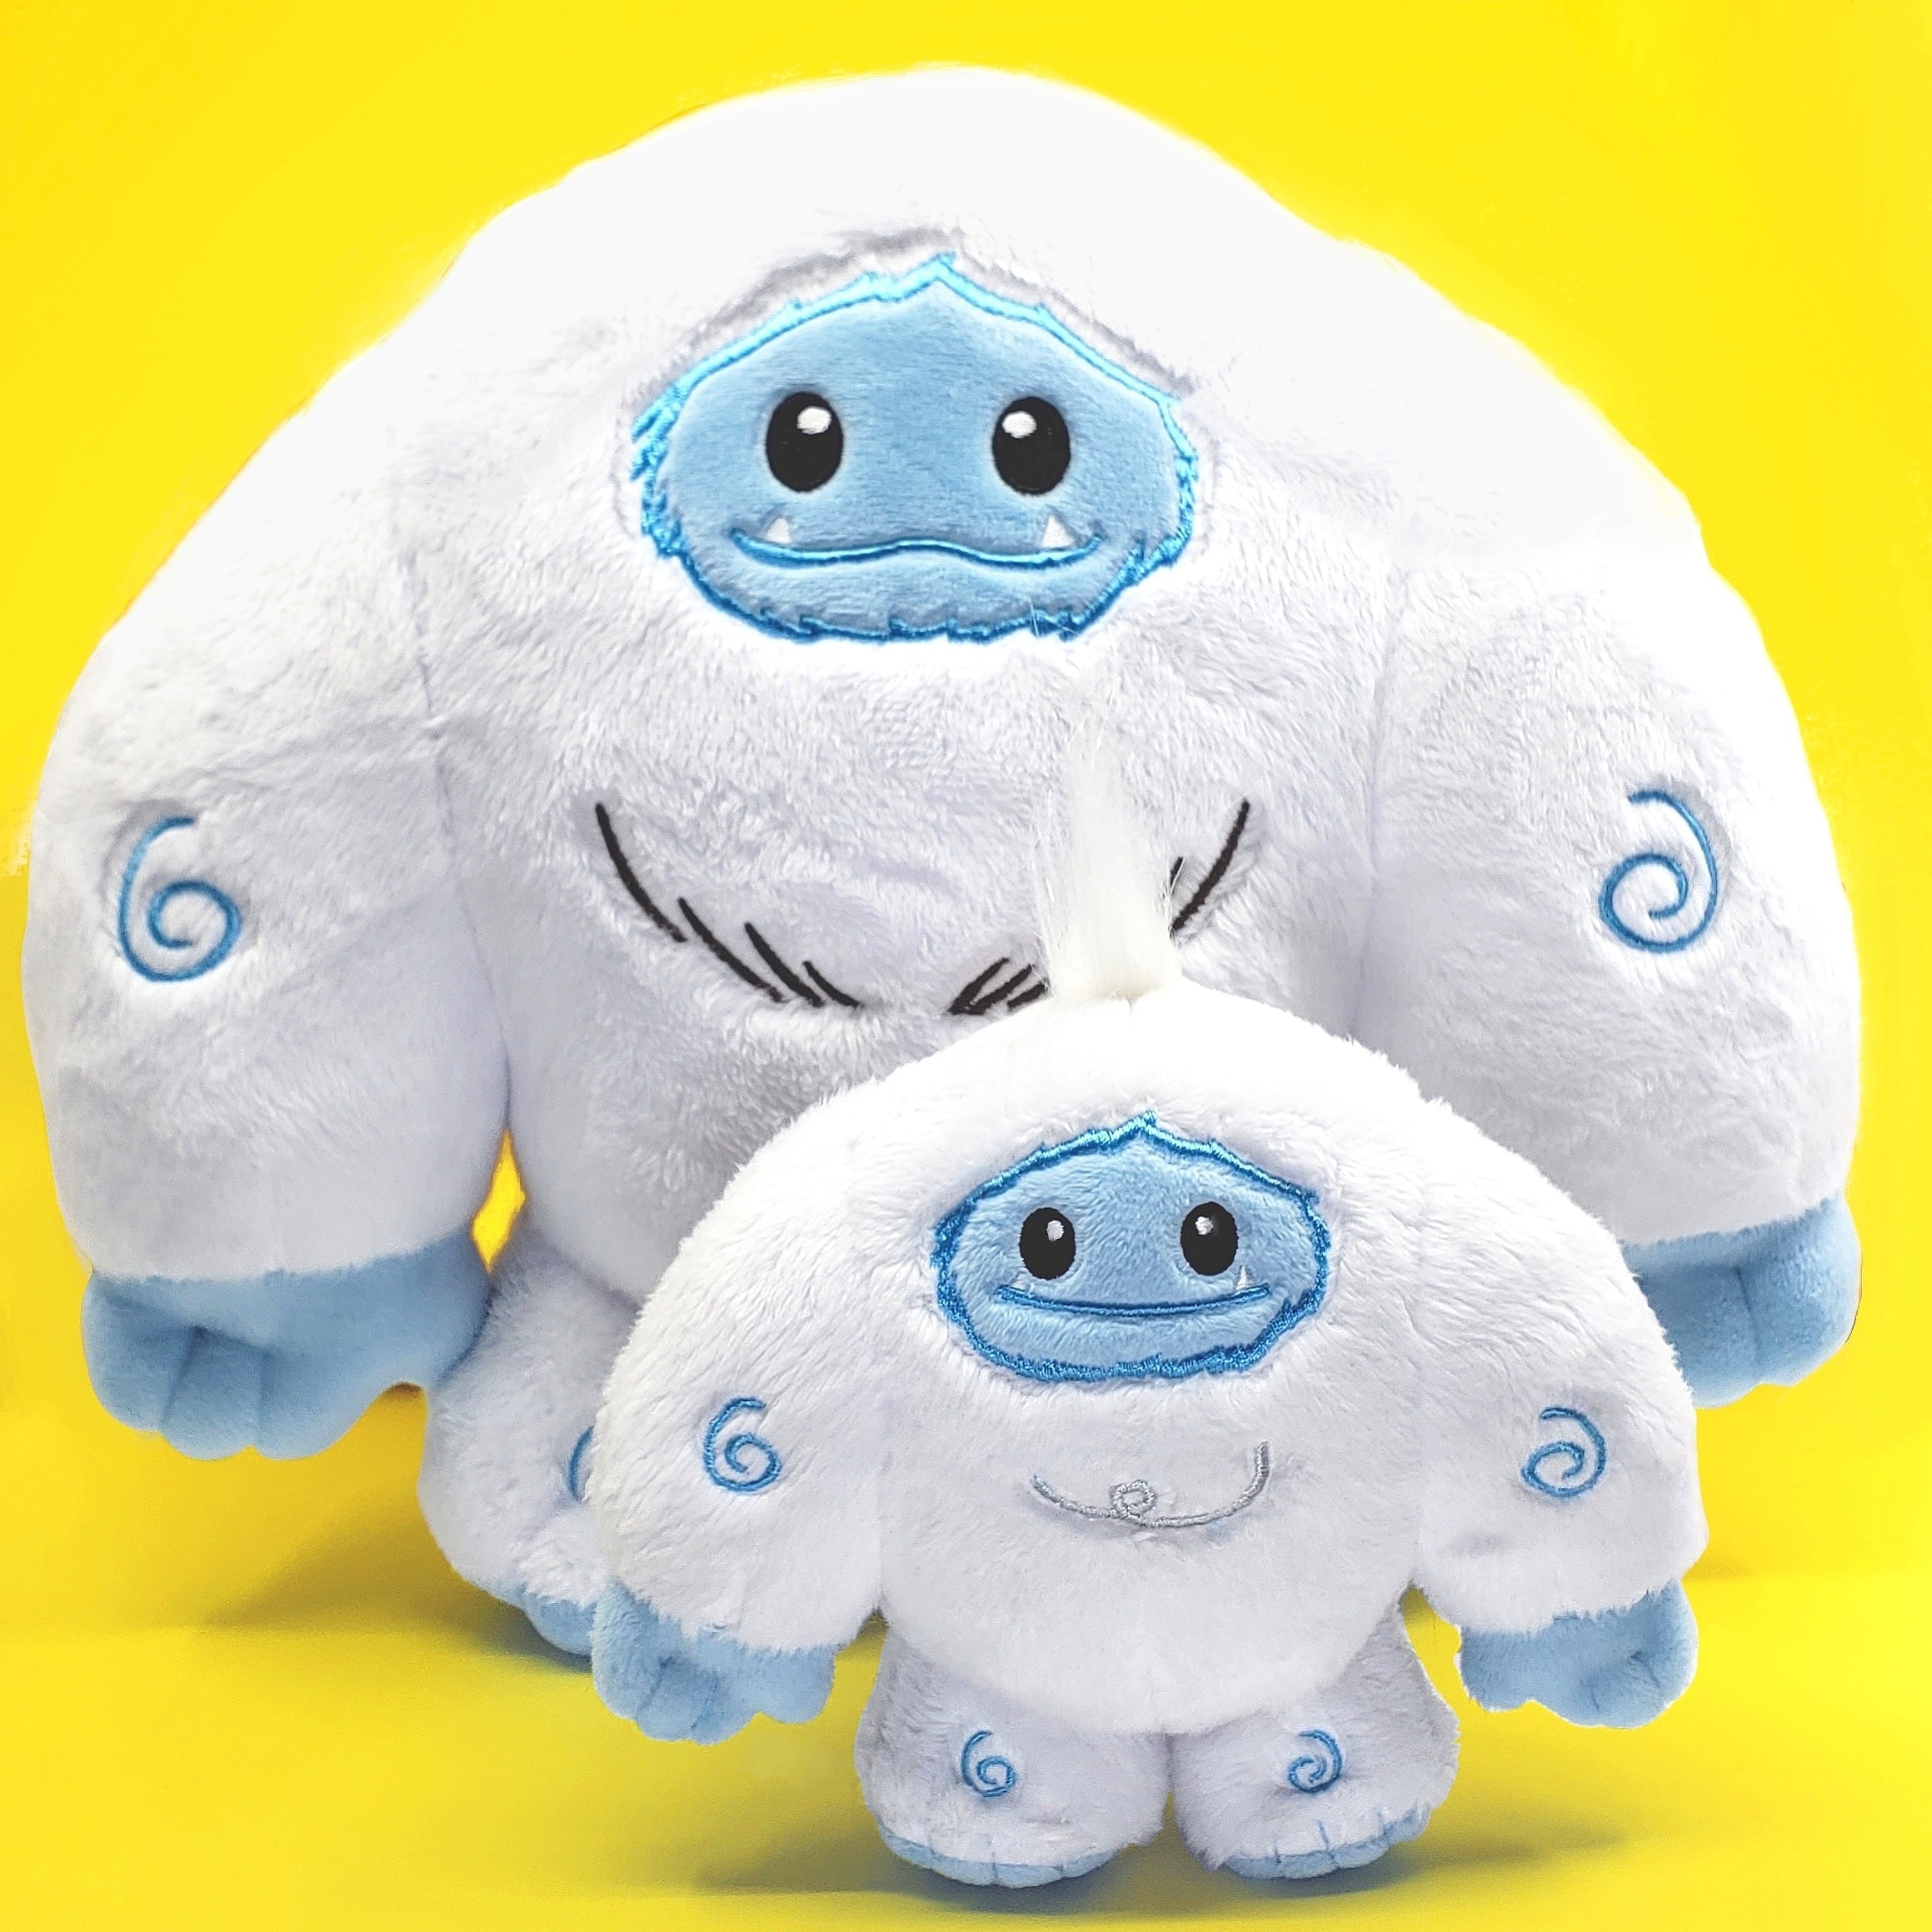 DREAMWORKS ABOMINABLE SMALL 16CM PLUSH - CHOOSE YOUR CHARACTER - BRAND NEW